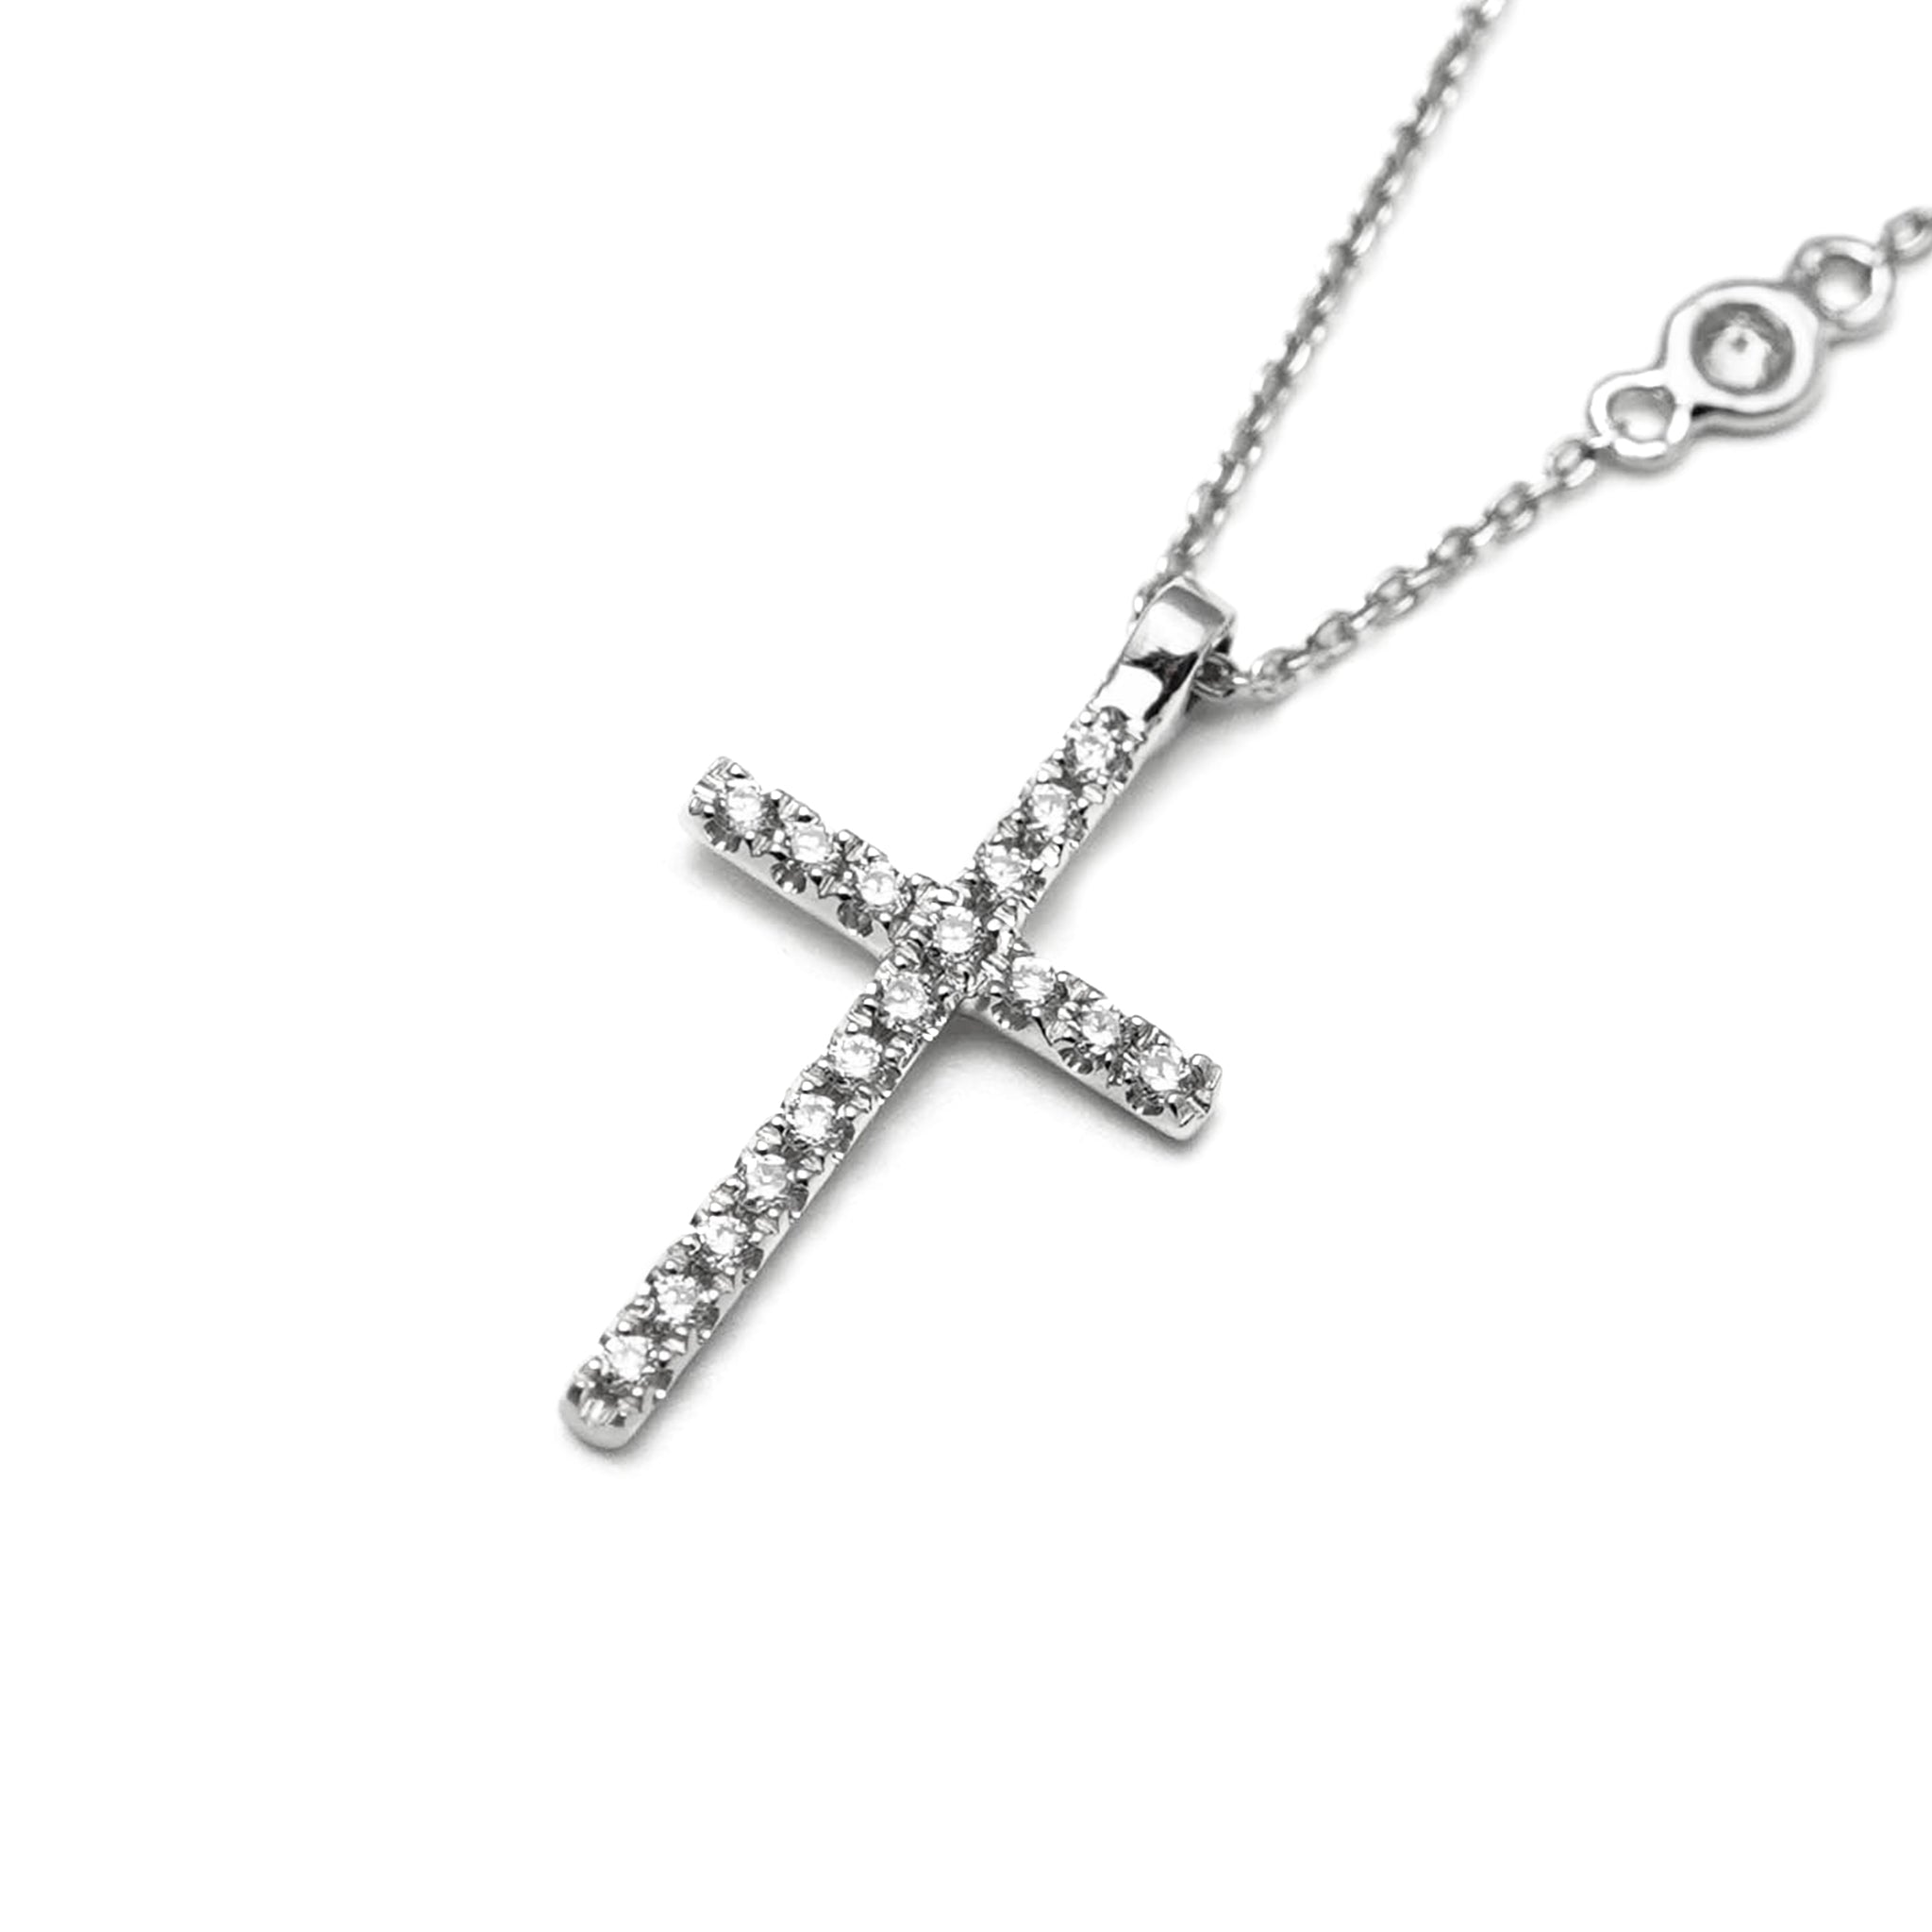 18K White Gold Diamond Cross Necklace (Petite) with 18k White Gold Chain